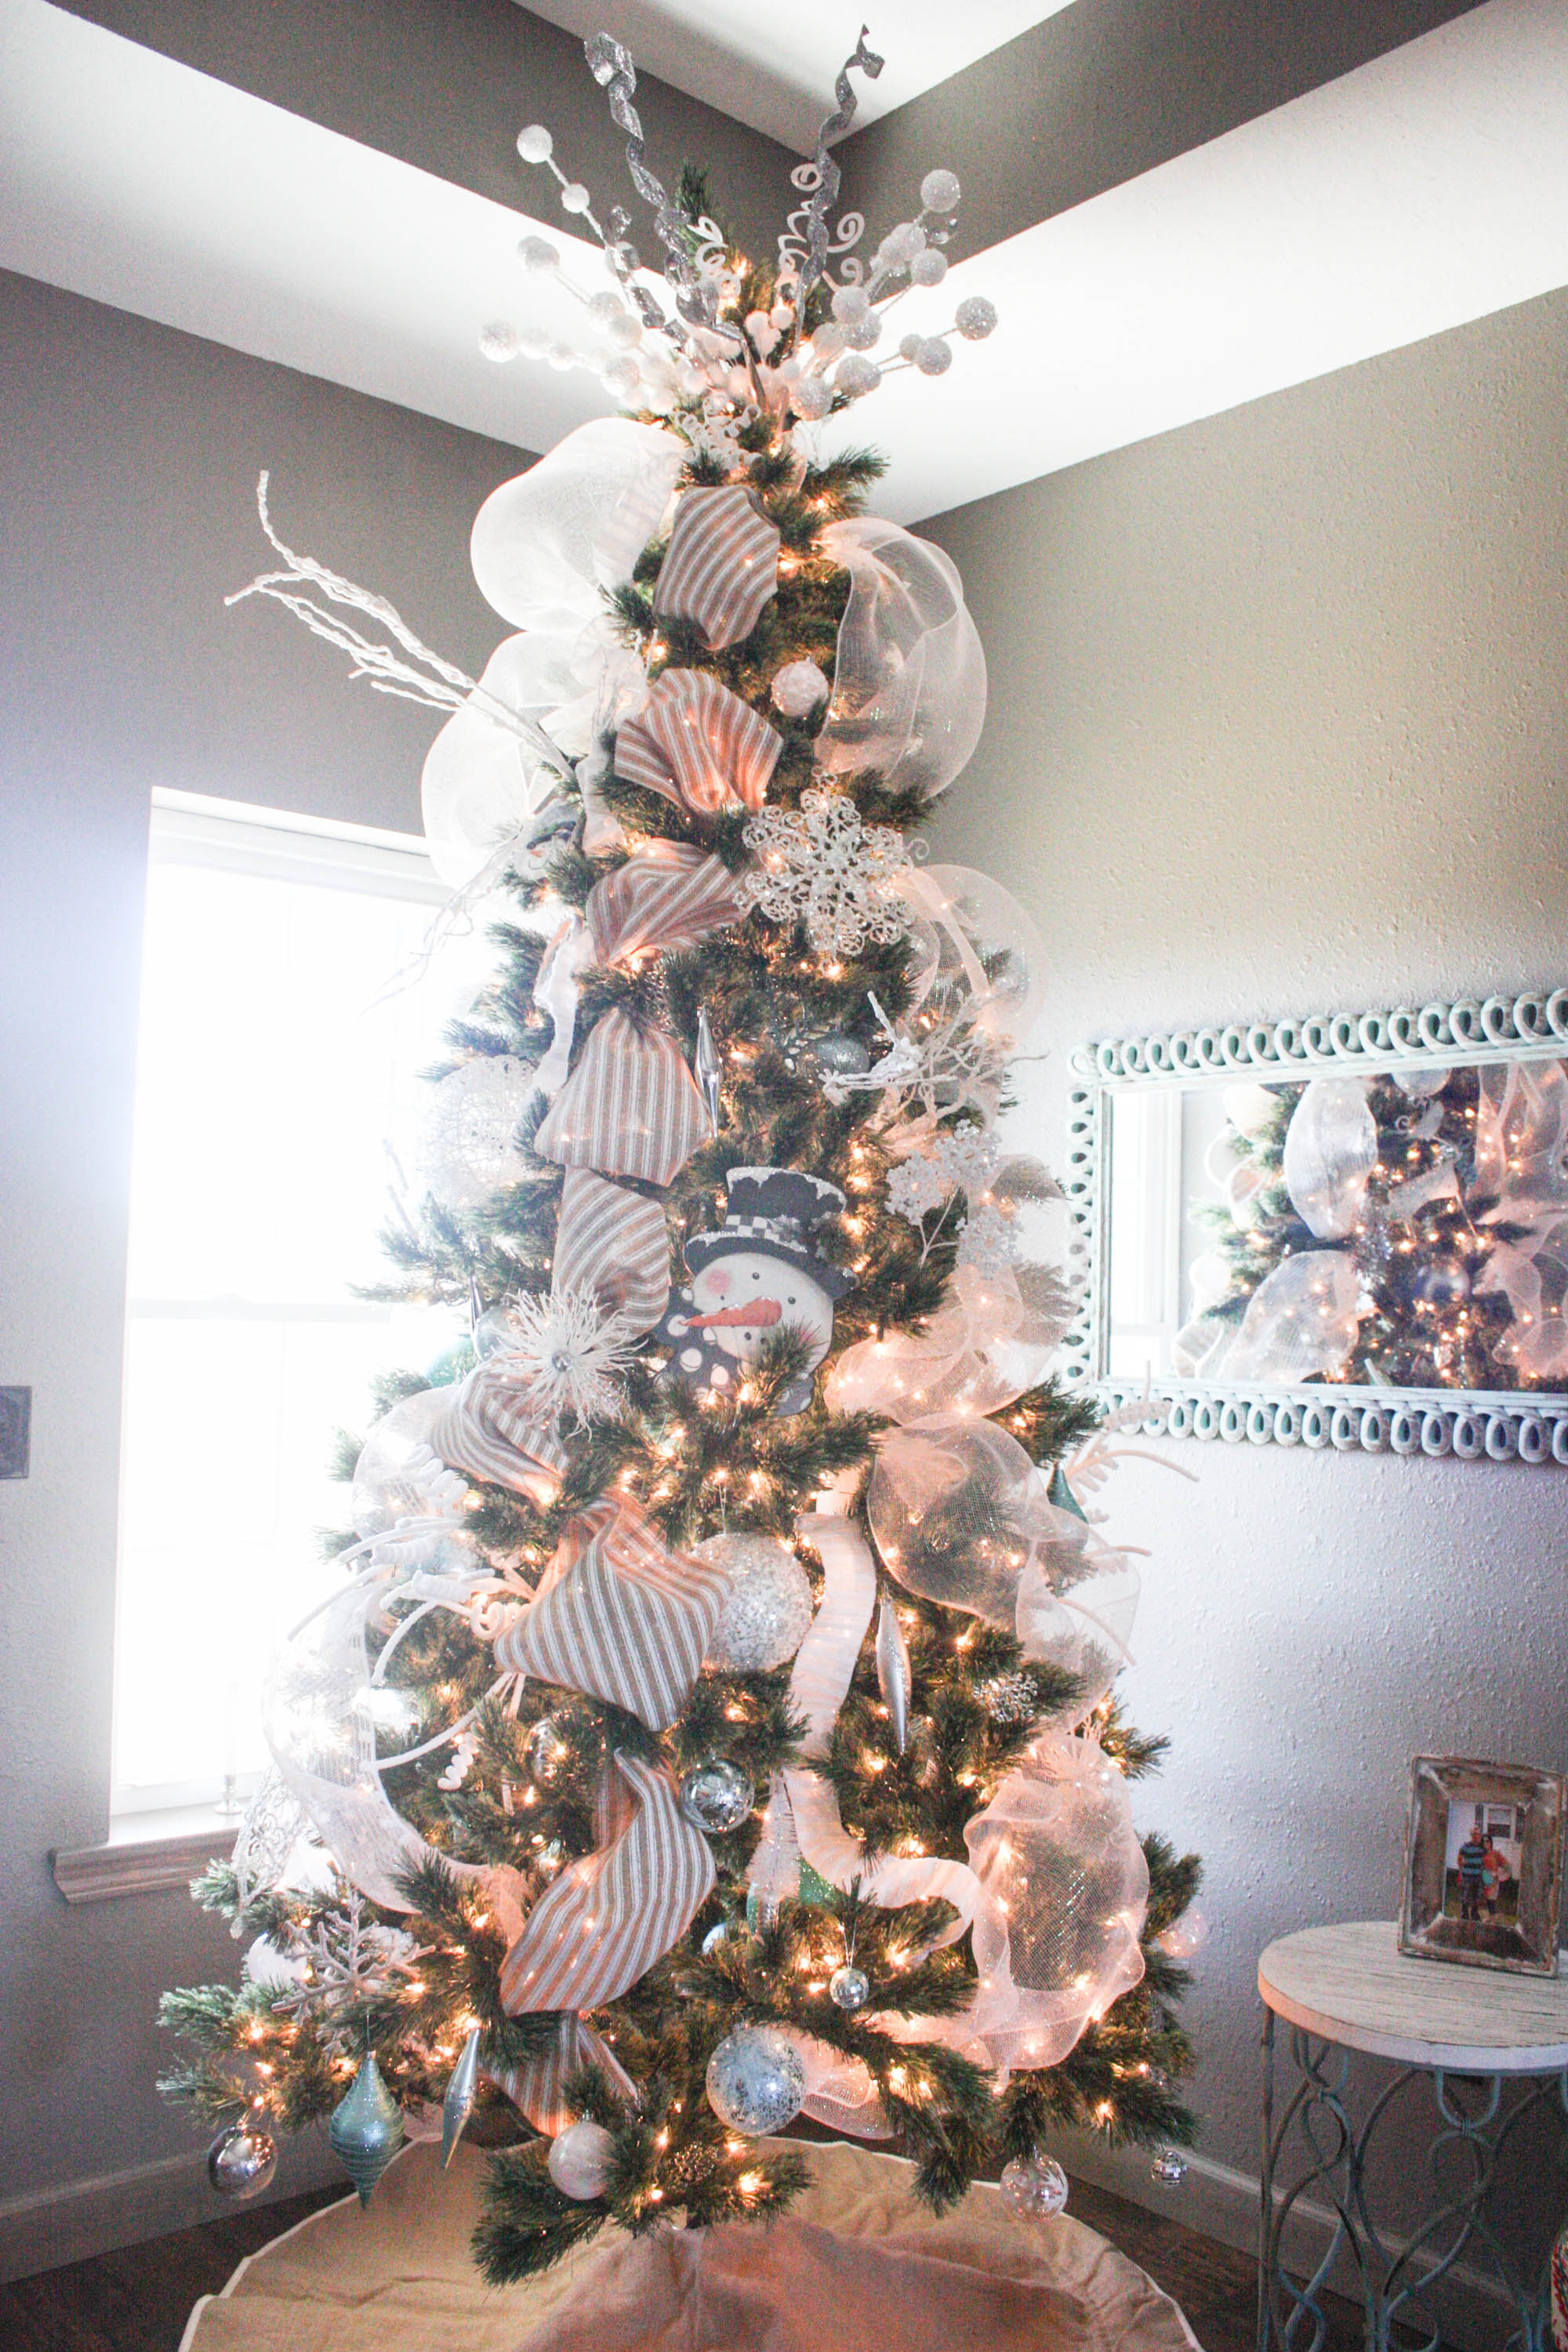 How To Decorate A Christmas Tree From Start To Finish the EASY Way 